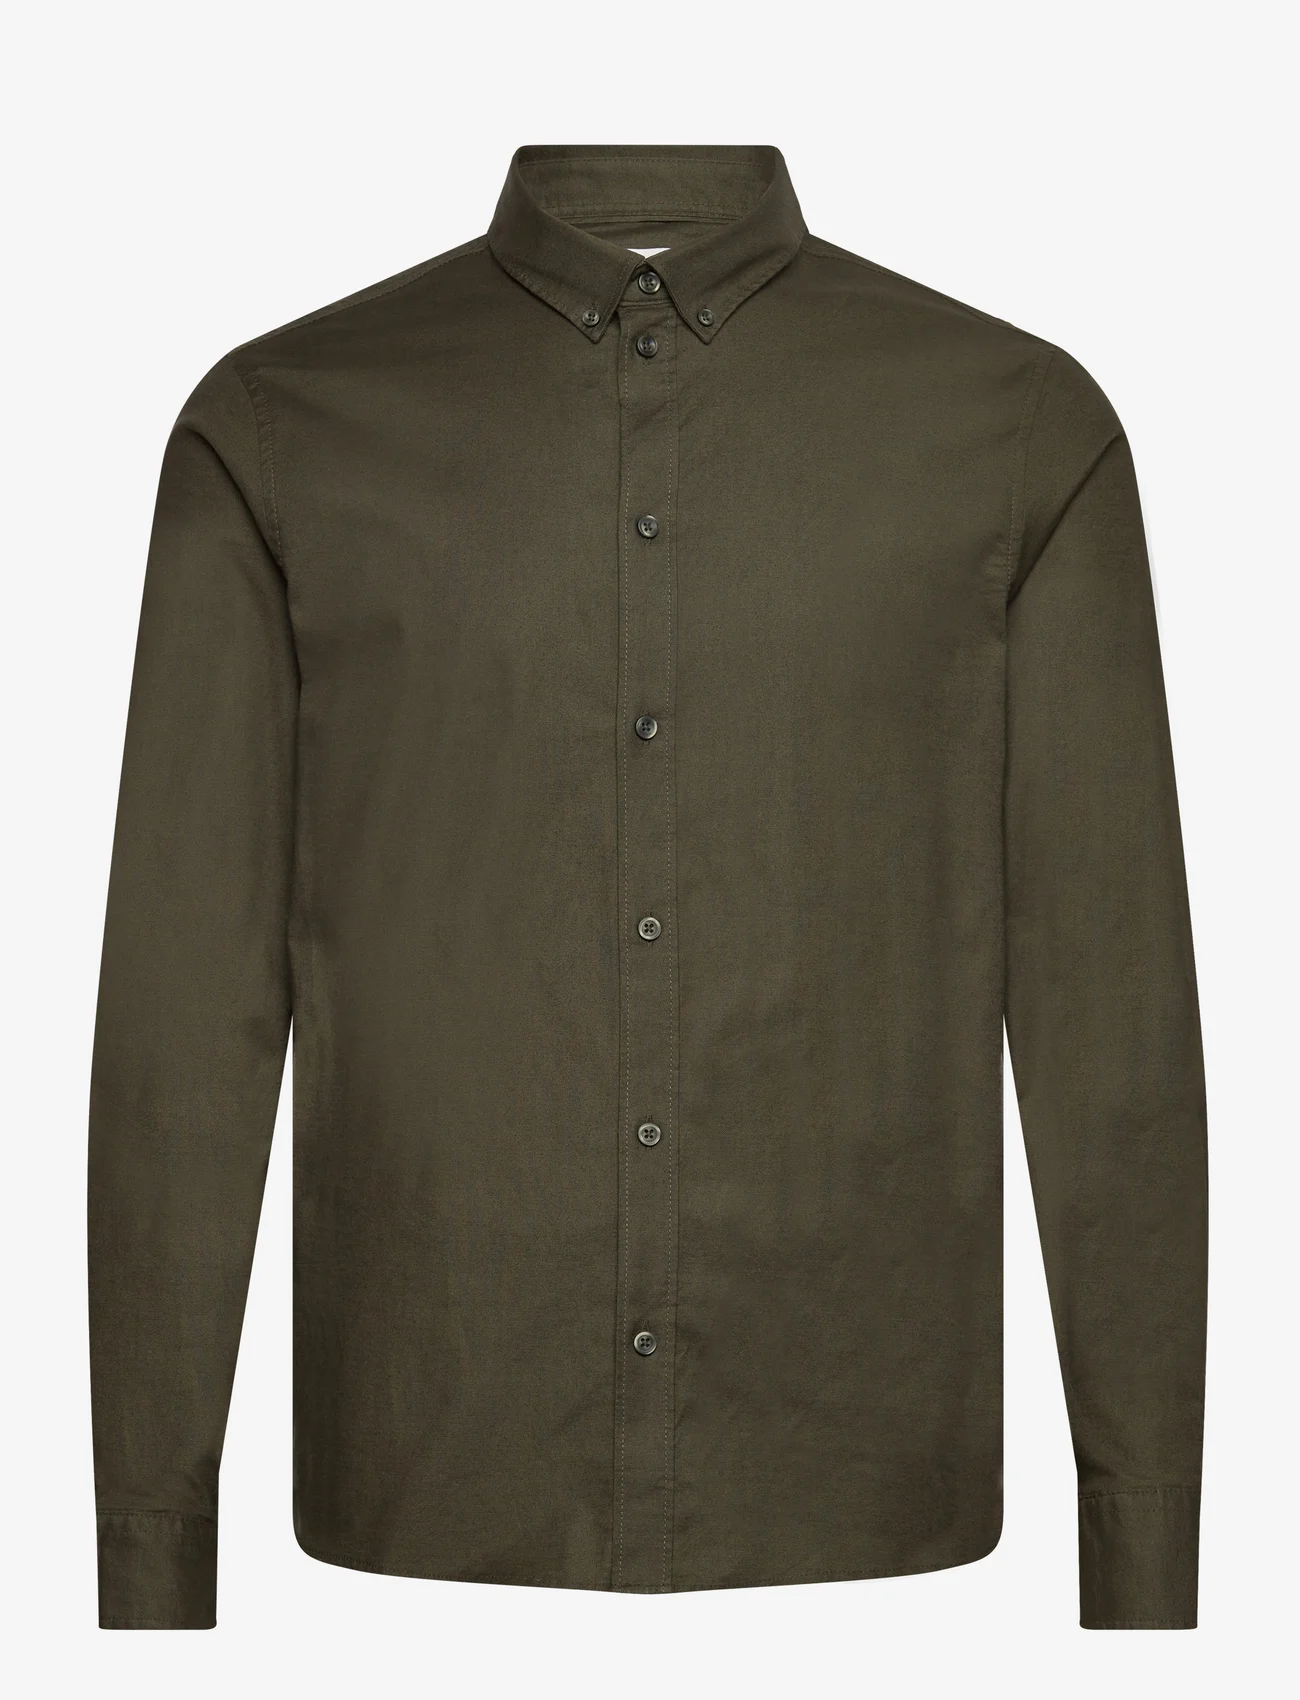 Solid - SDVAL SH - basic shirts - forest night - 0